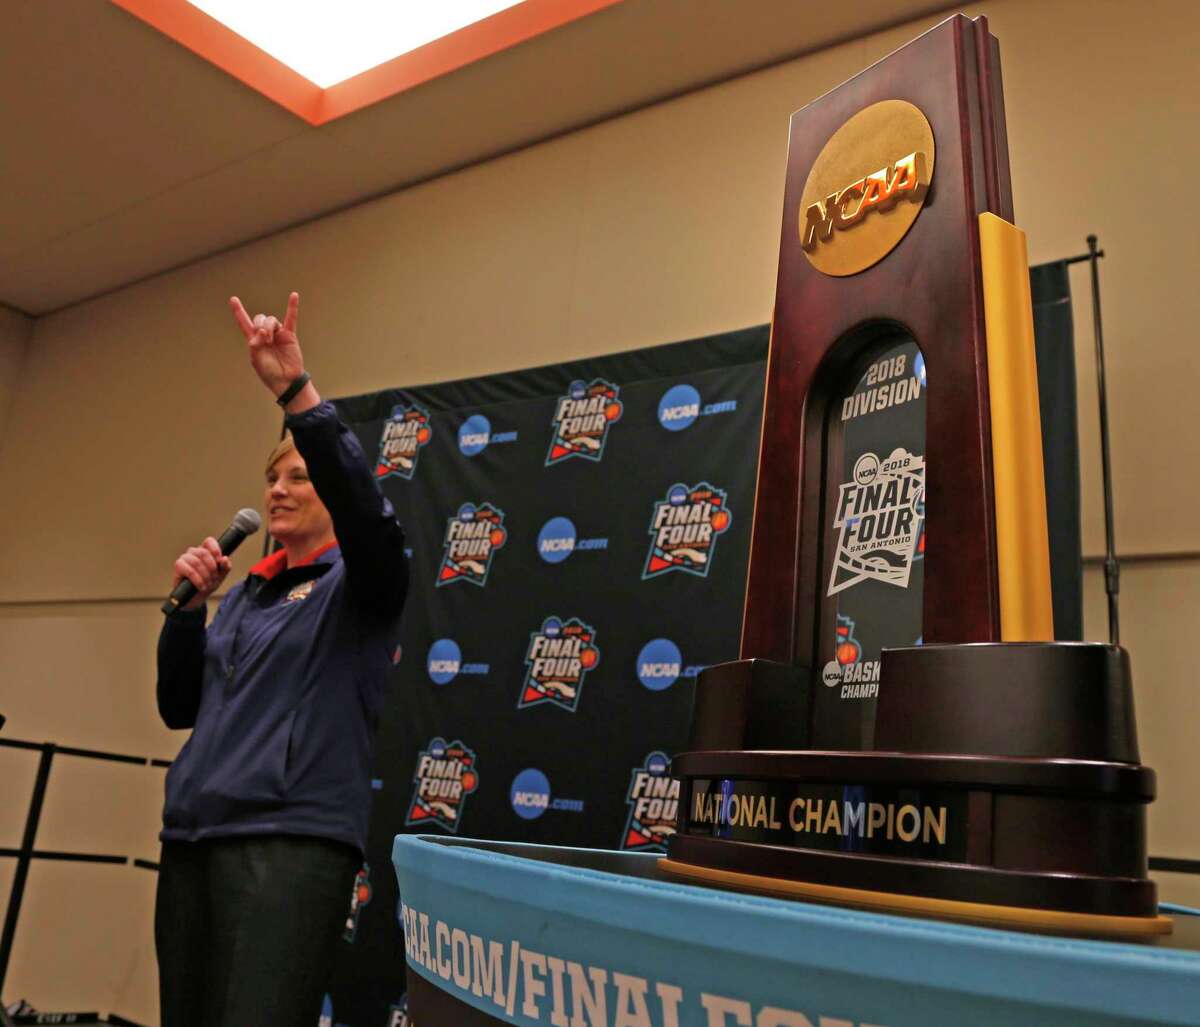 San Antonio Sports chief operating officer Jenny Carnes said she’s confident that the city is prepared to host its fourth Women’s Final Four.